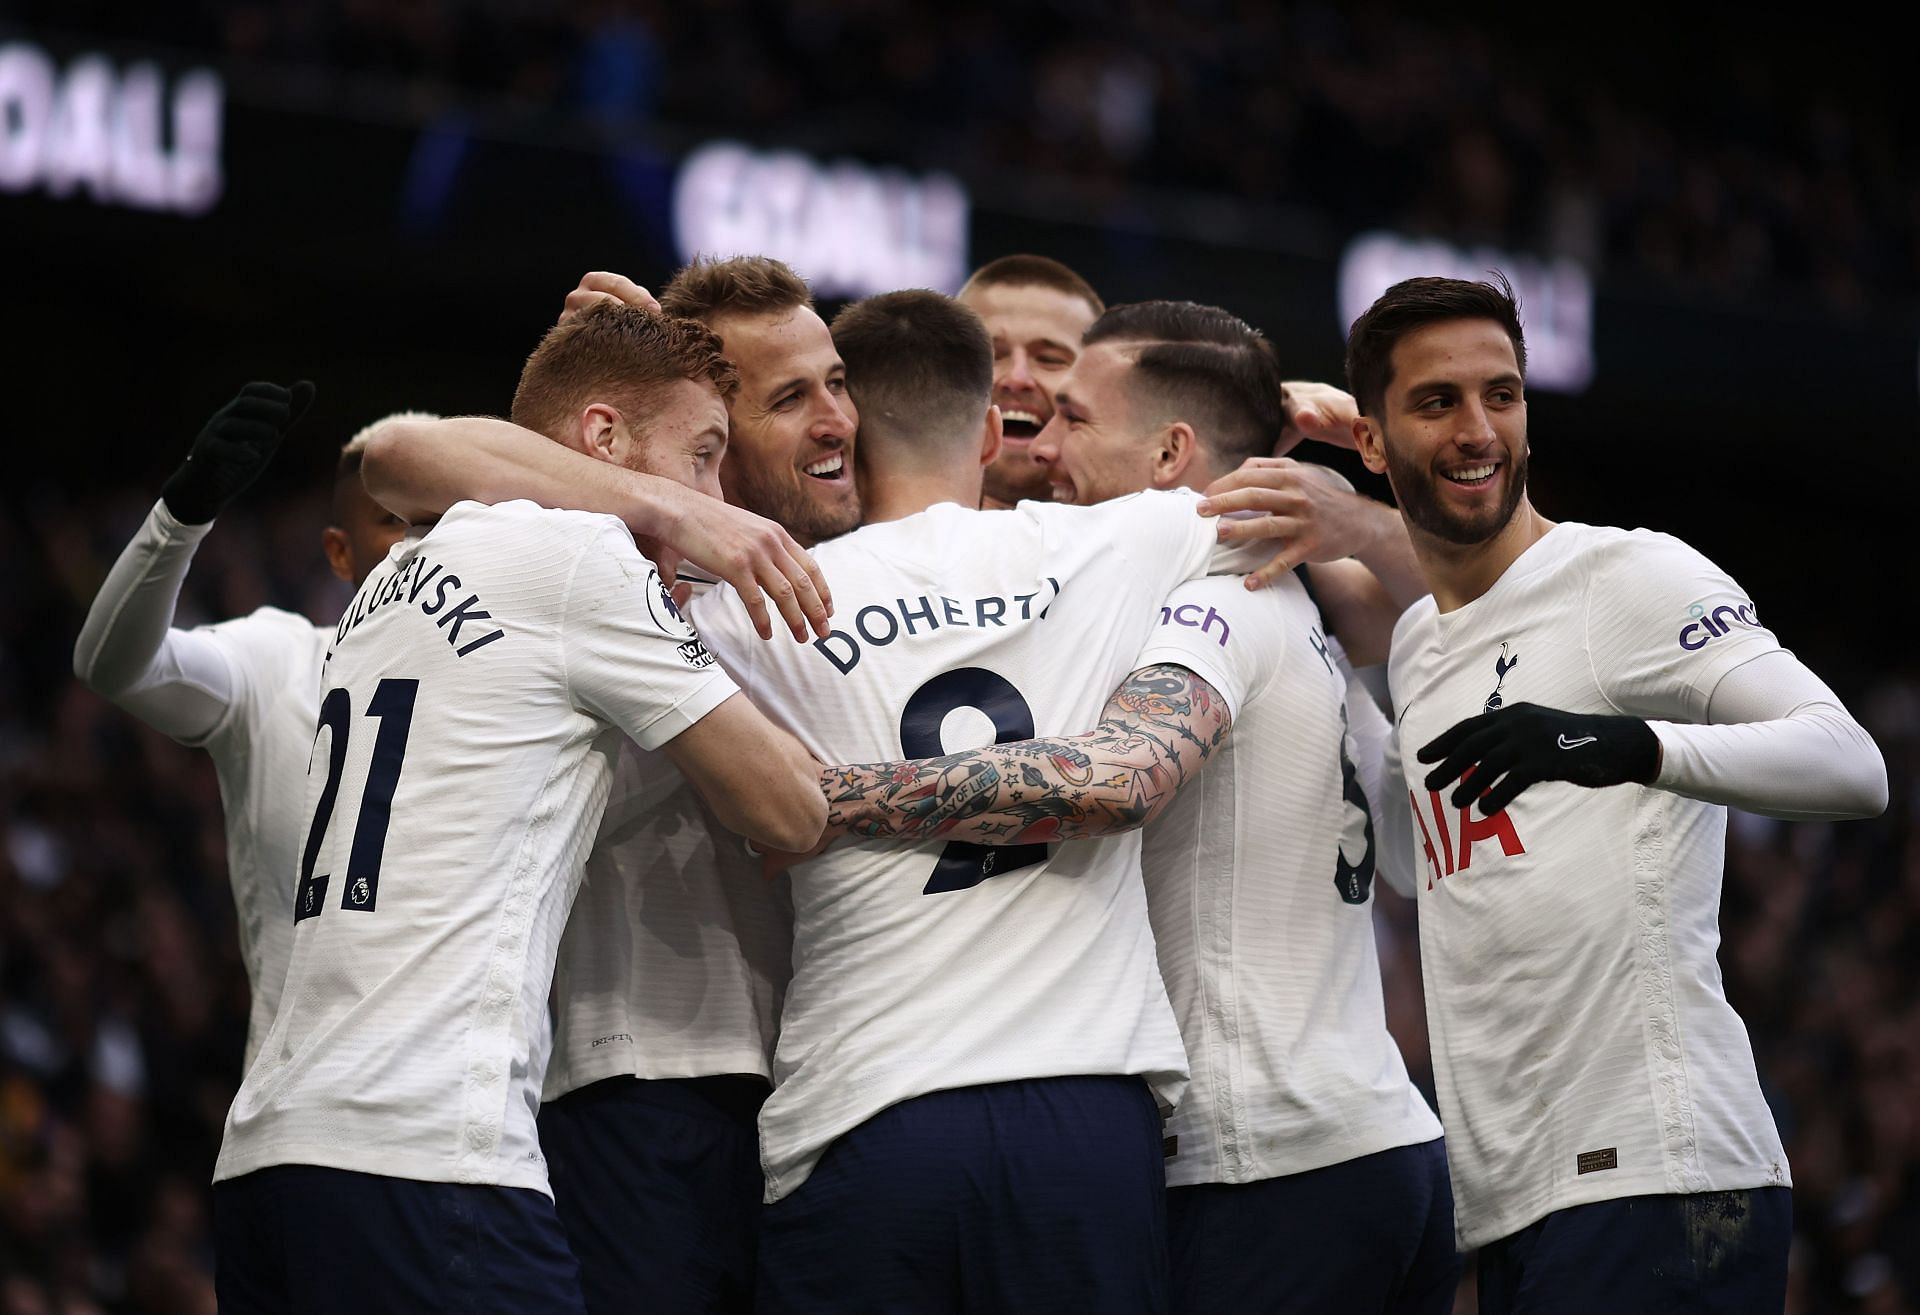 Tottenham are in the driving seat in the race for a top-four finish.